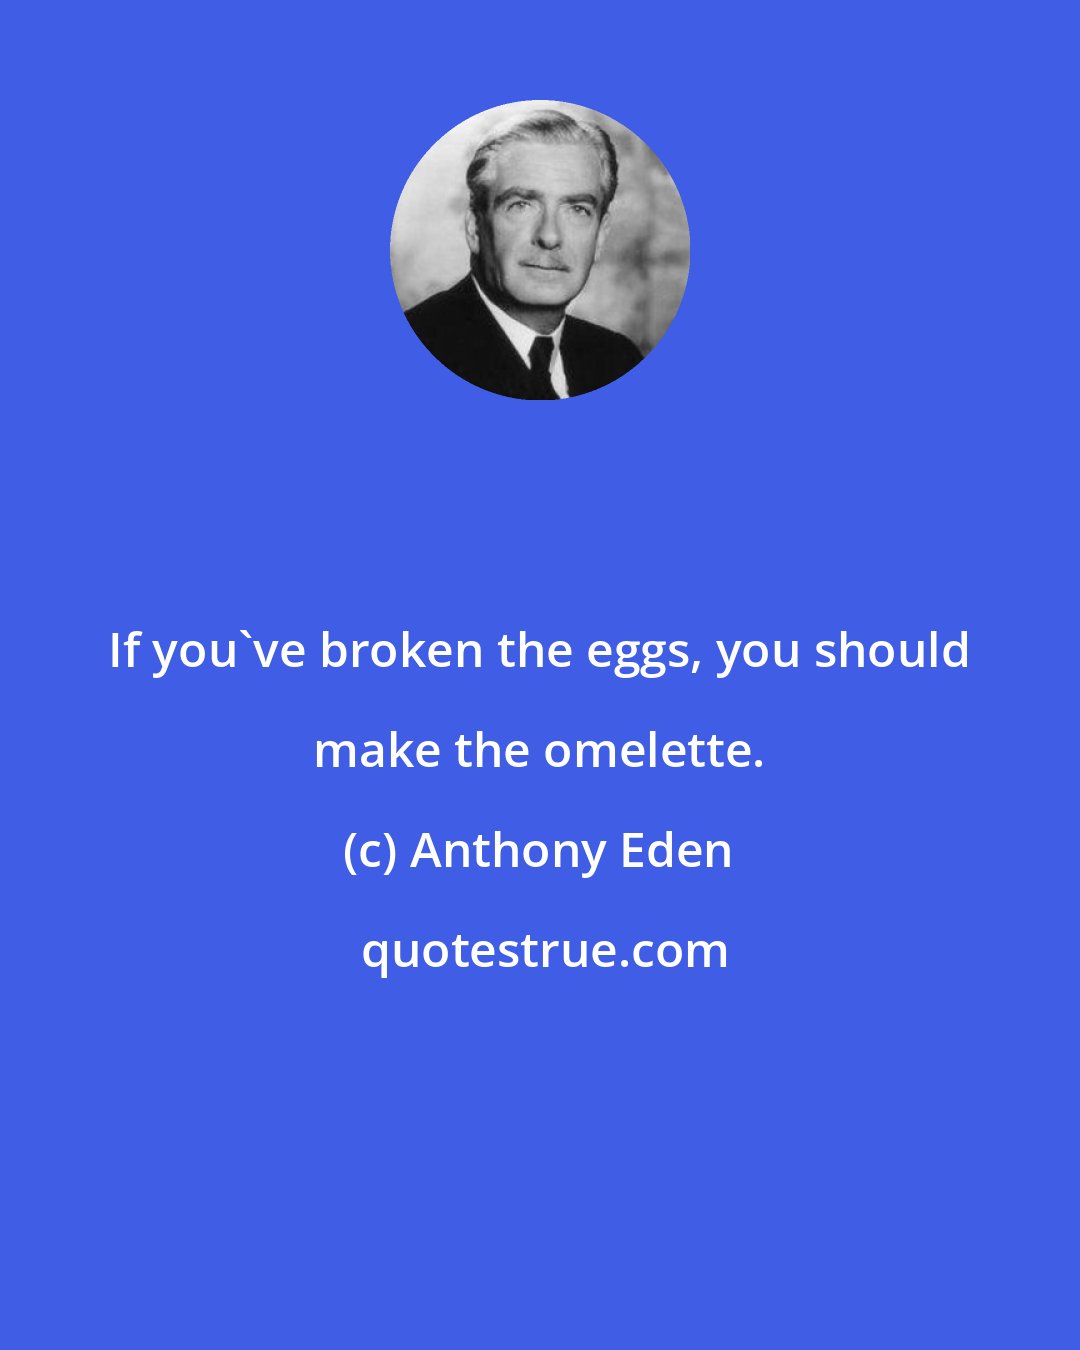 Anthony Eden: If you've broken the eggs, you should make the omelette.